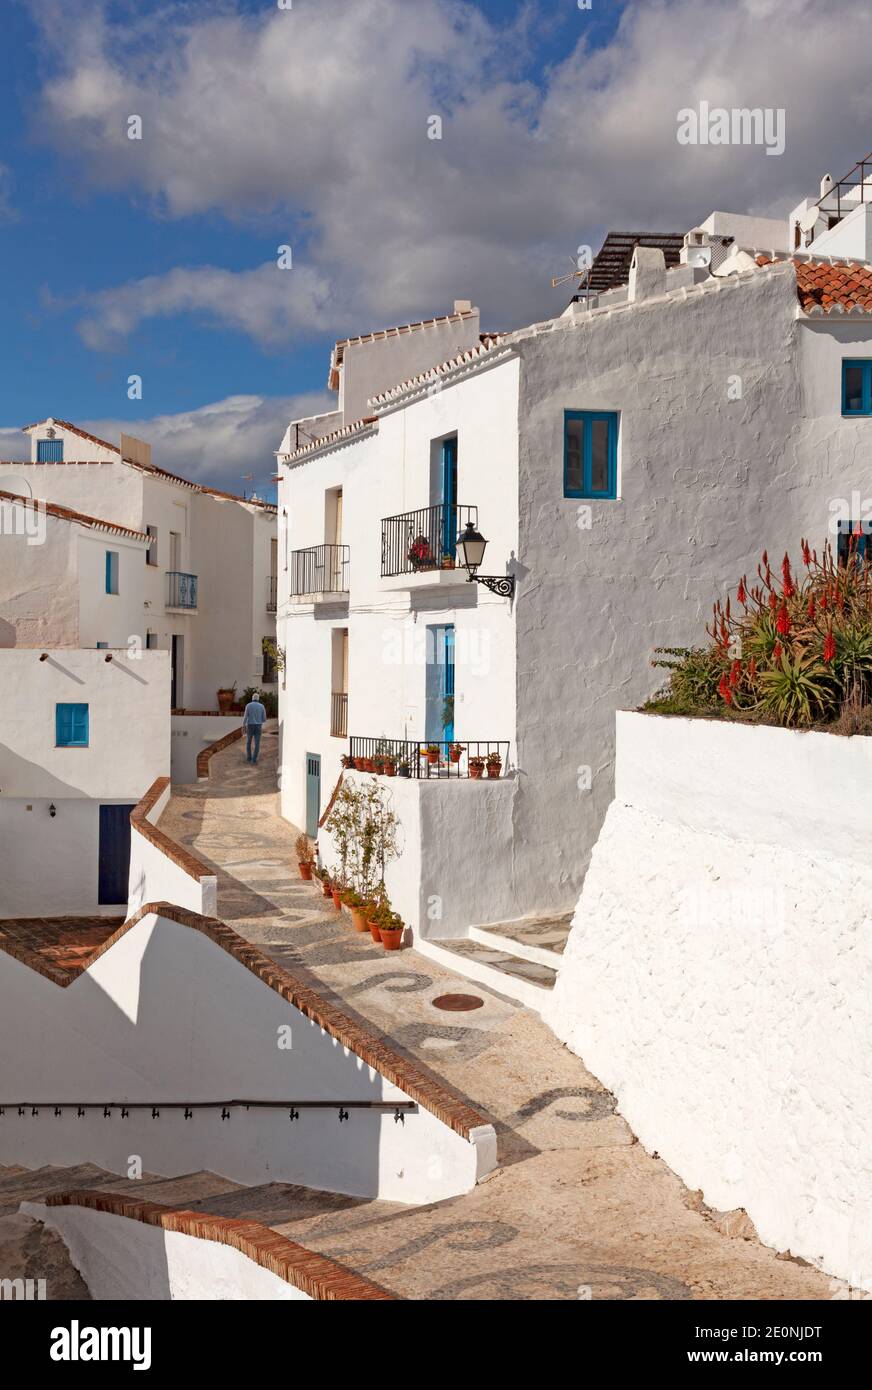 A street scene in the old part of the white village of Frigiliana,  Malaga Province, Andalucia, Spain Stock Photo